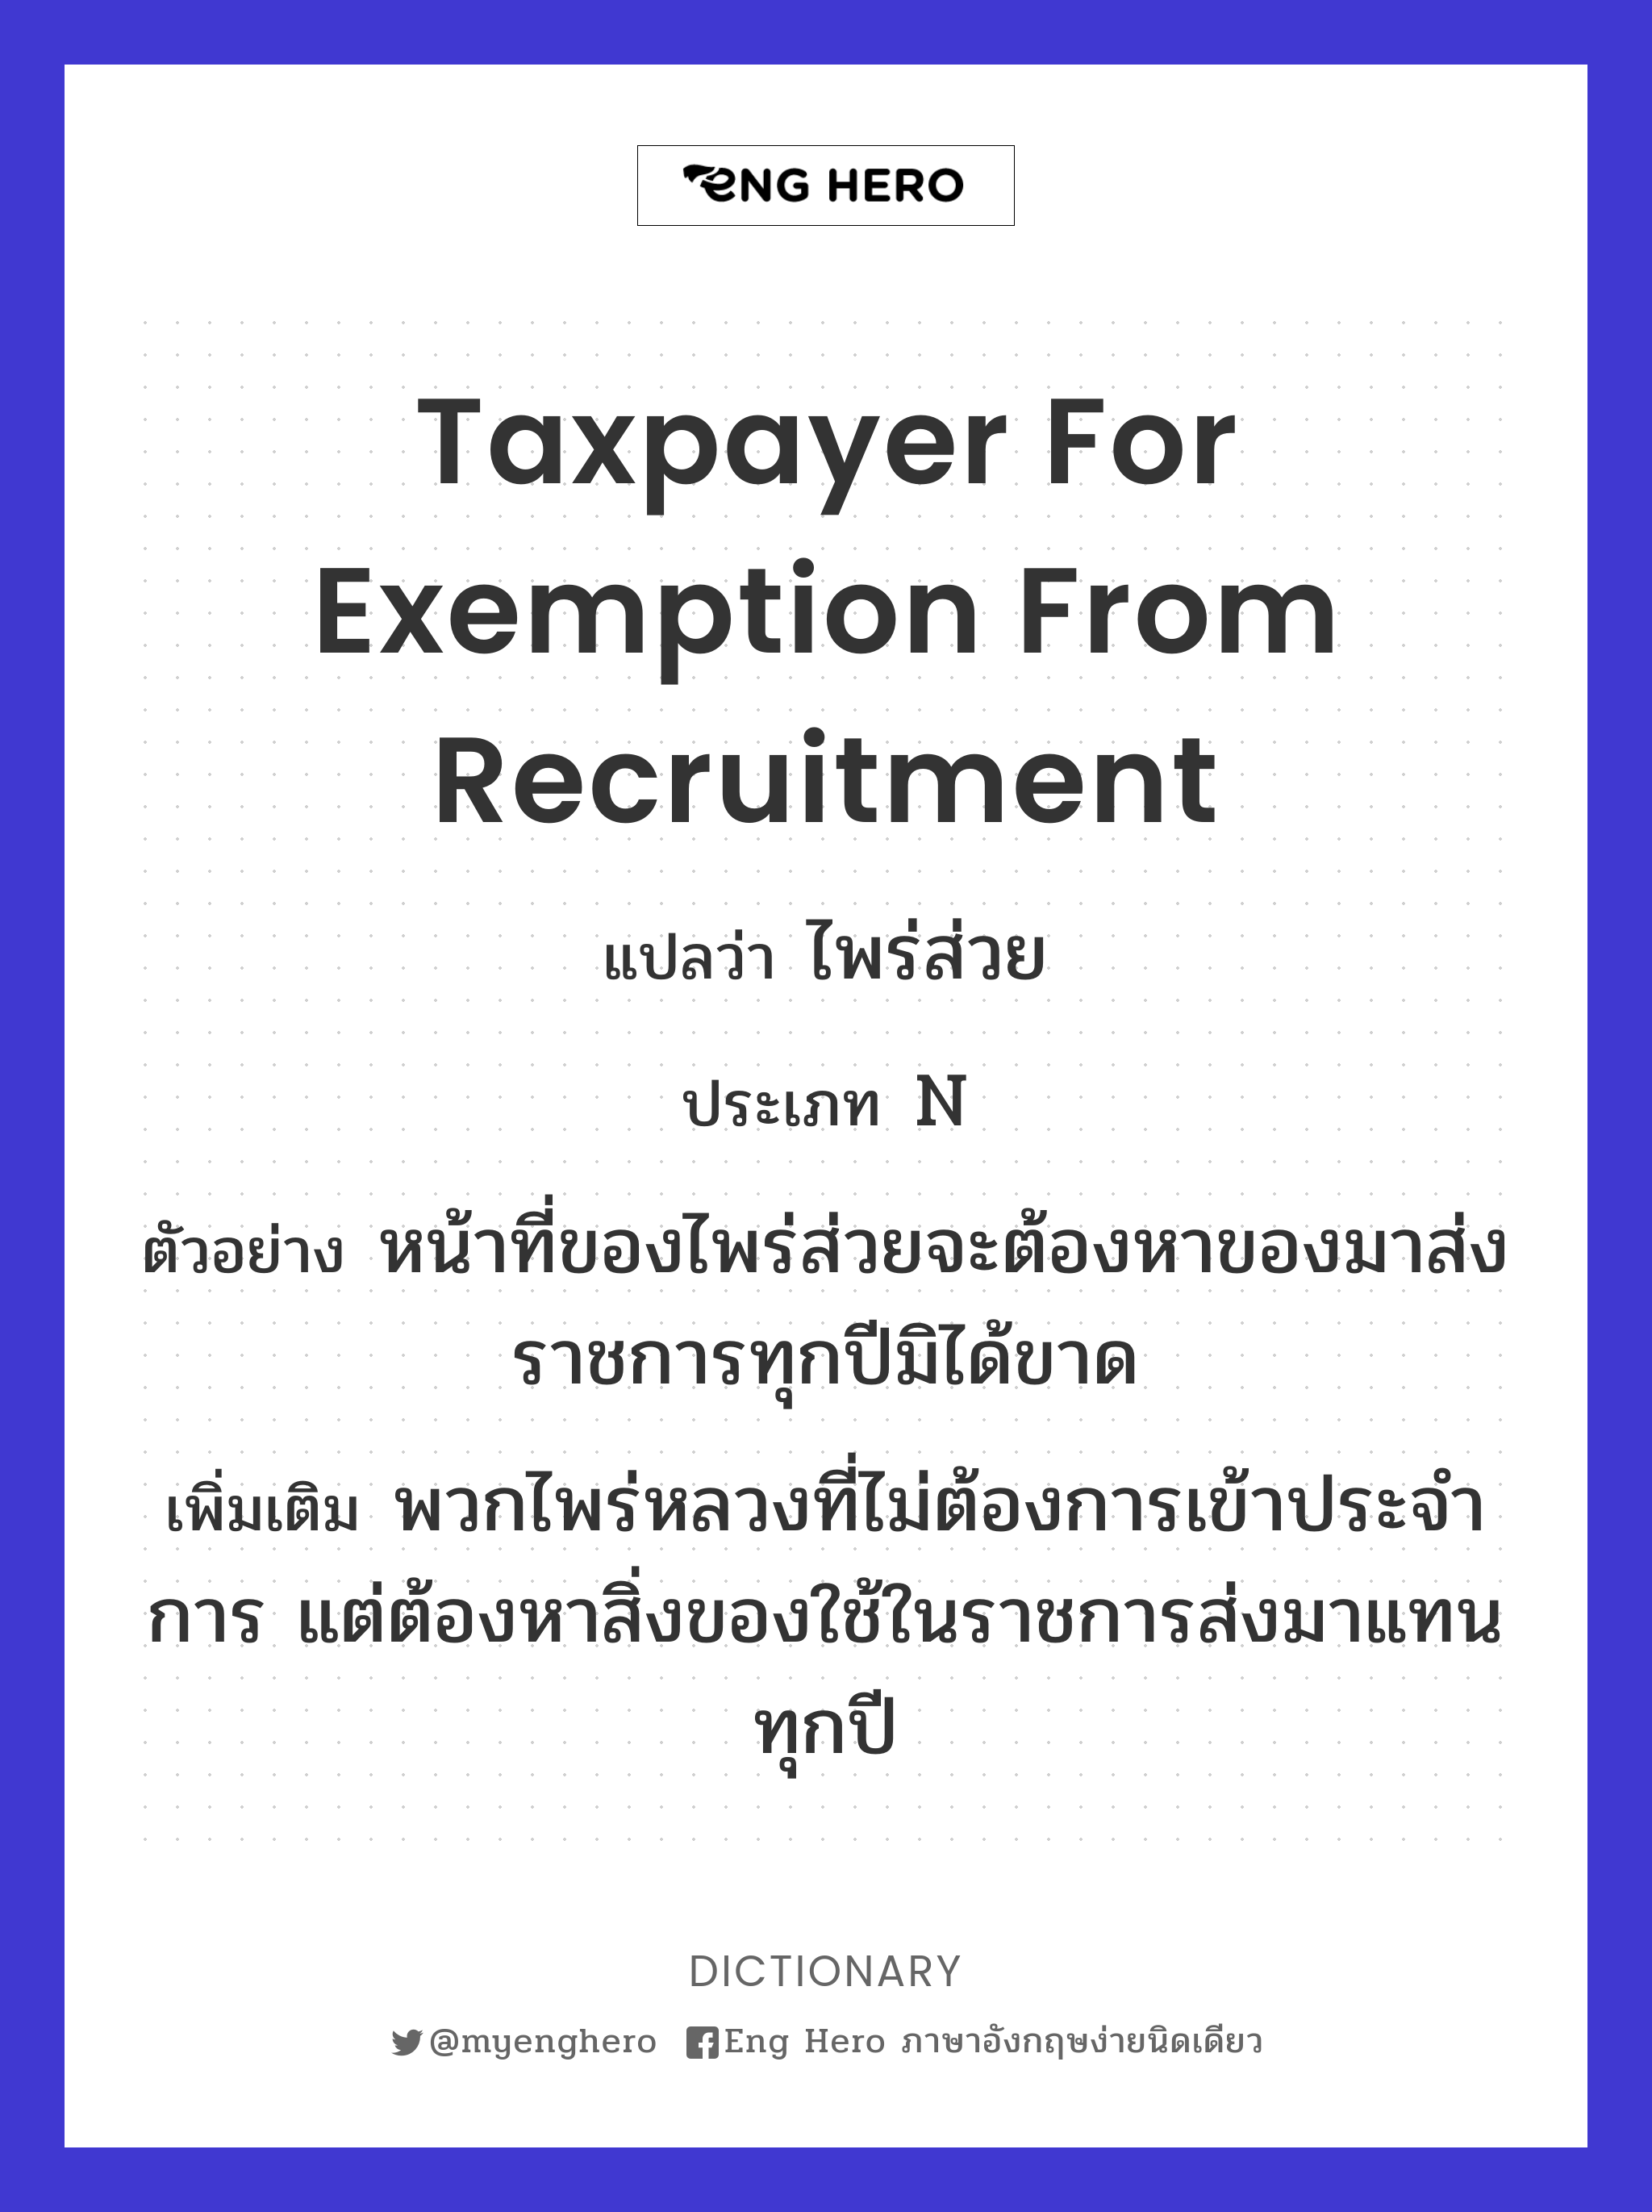 taxpayer for exemption from recruitment